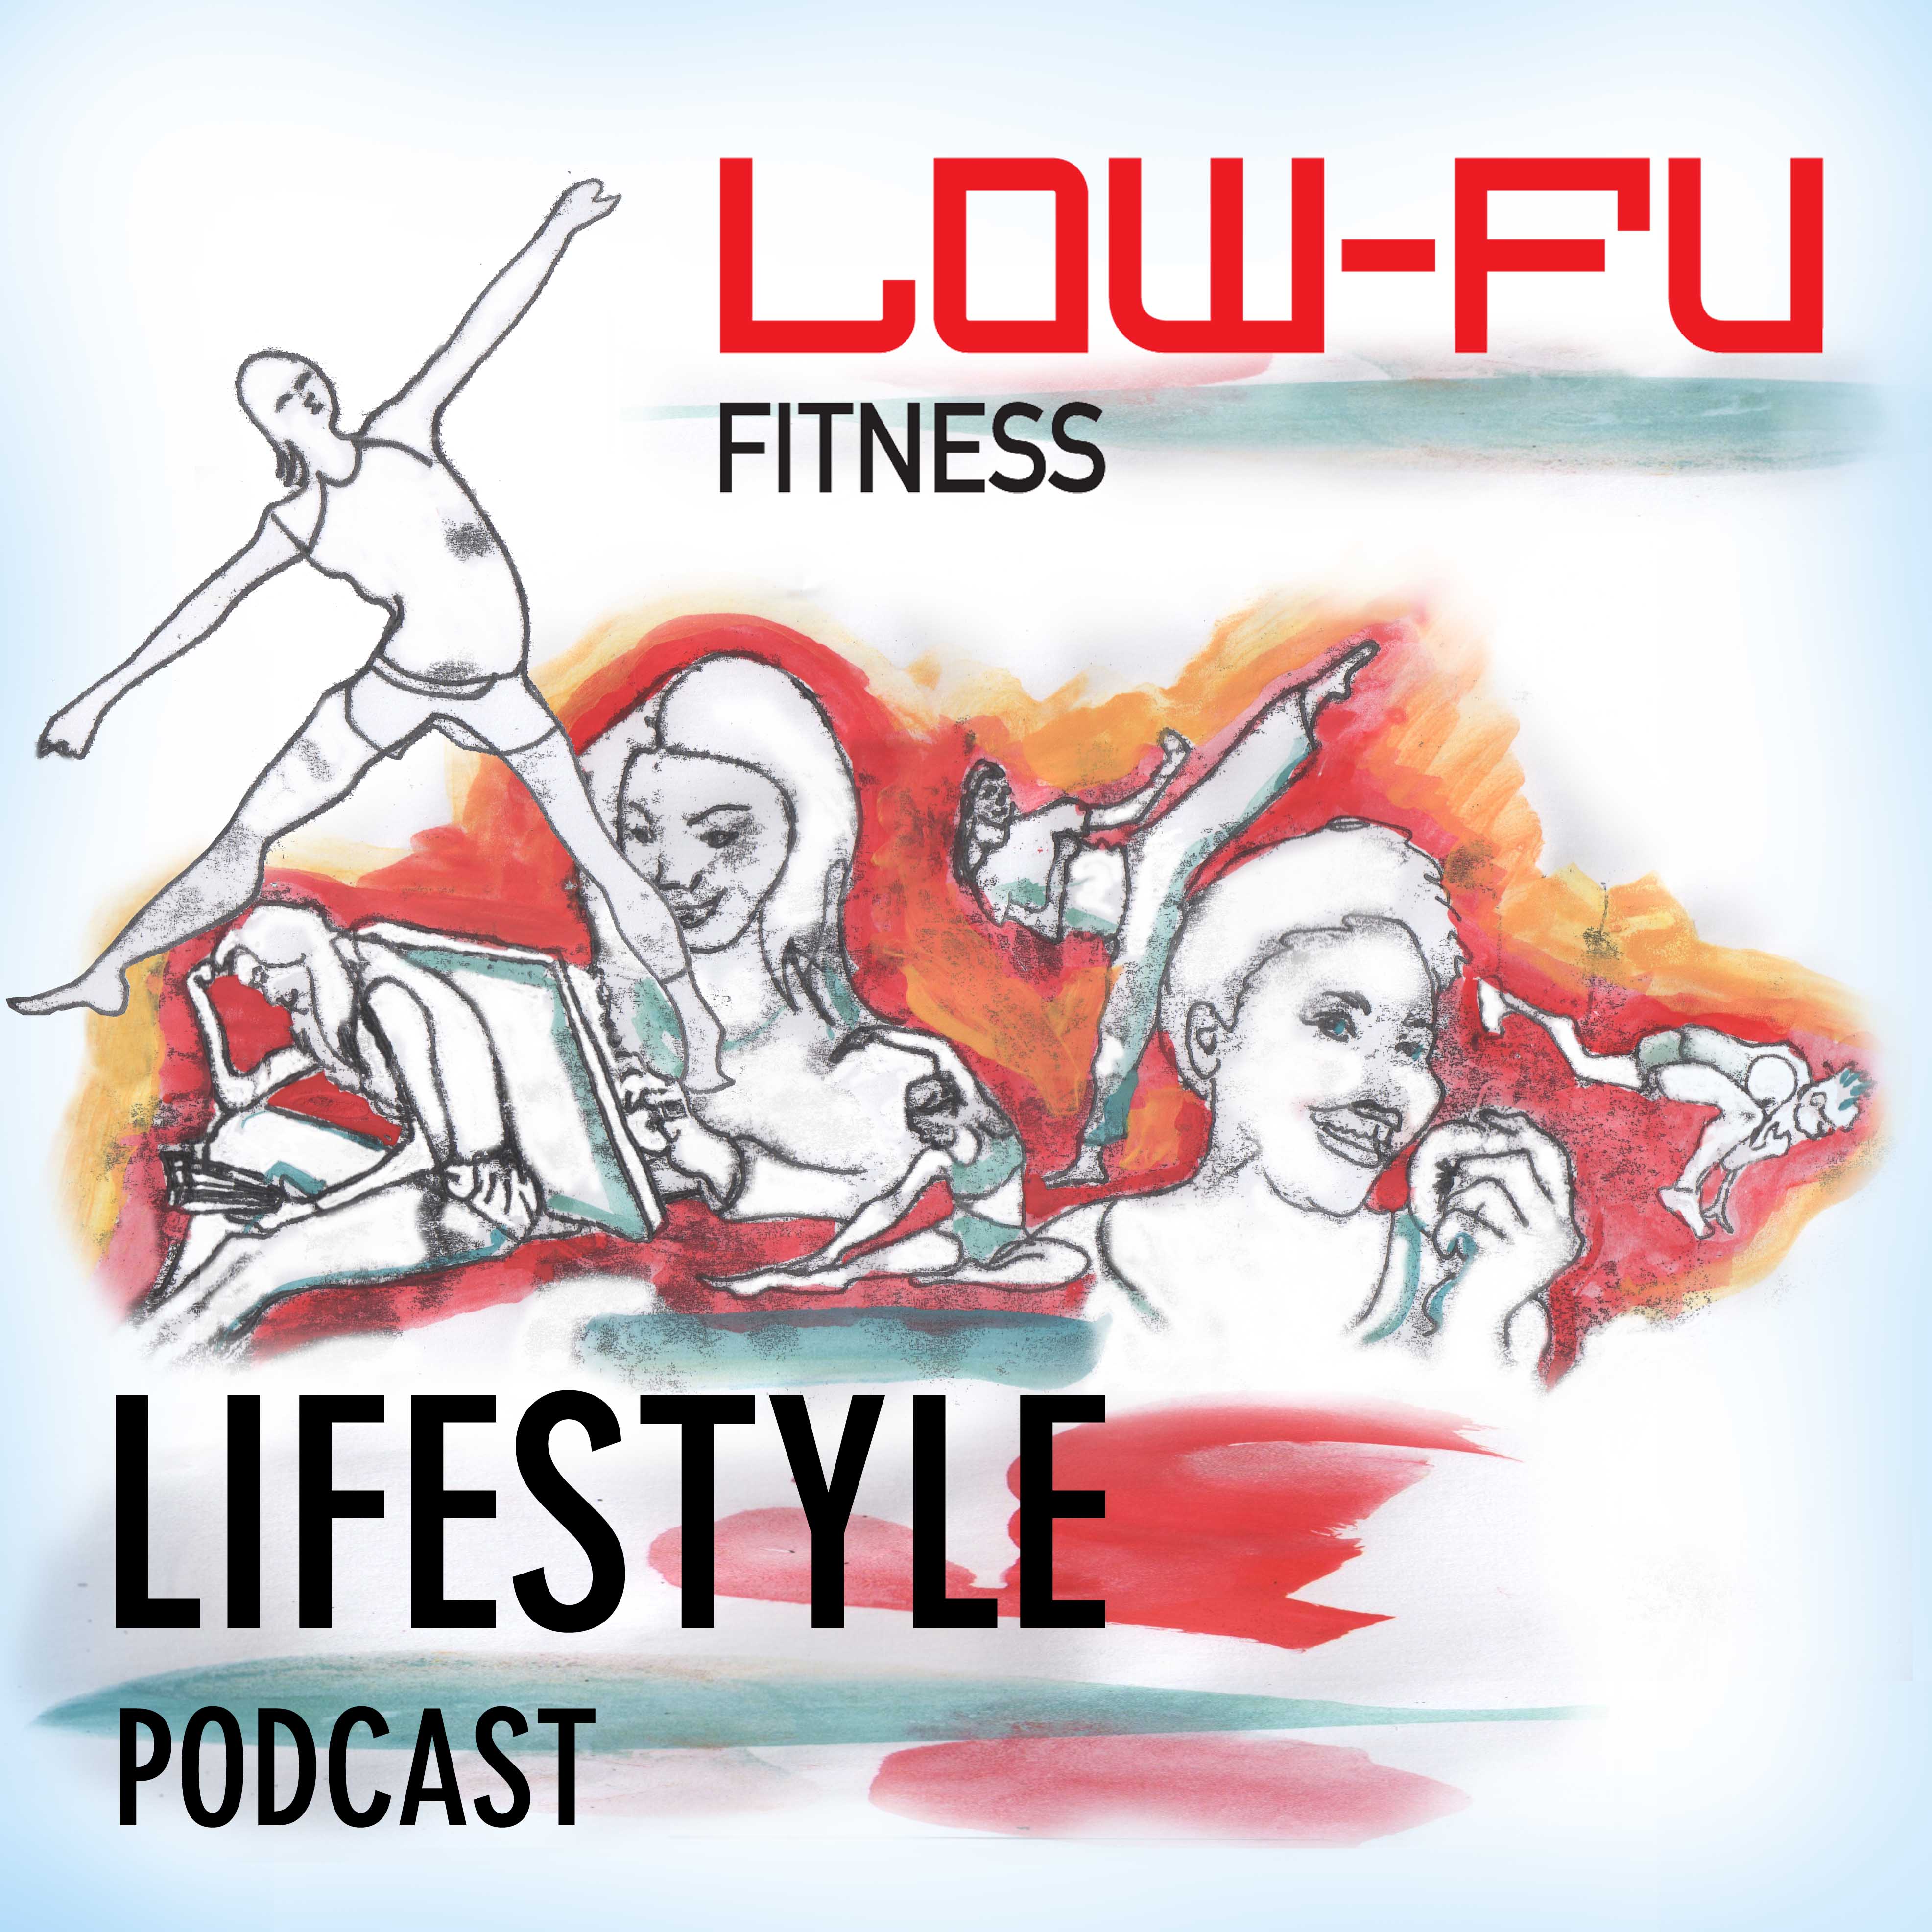 Low Fu Fitness Lifestyle Episode 2 Preparing to become a fitness teacher